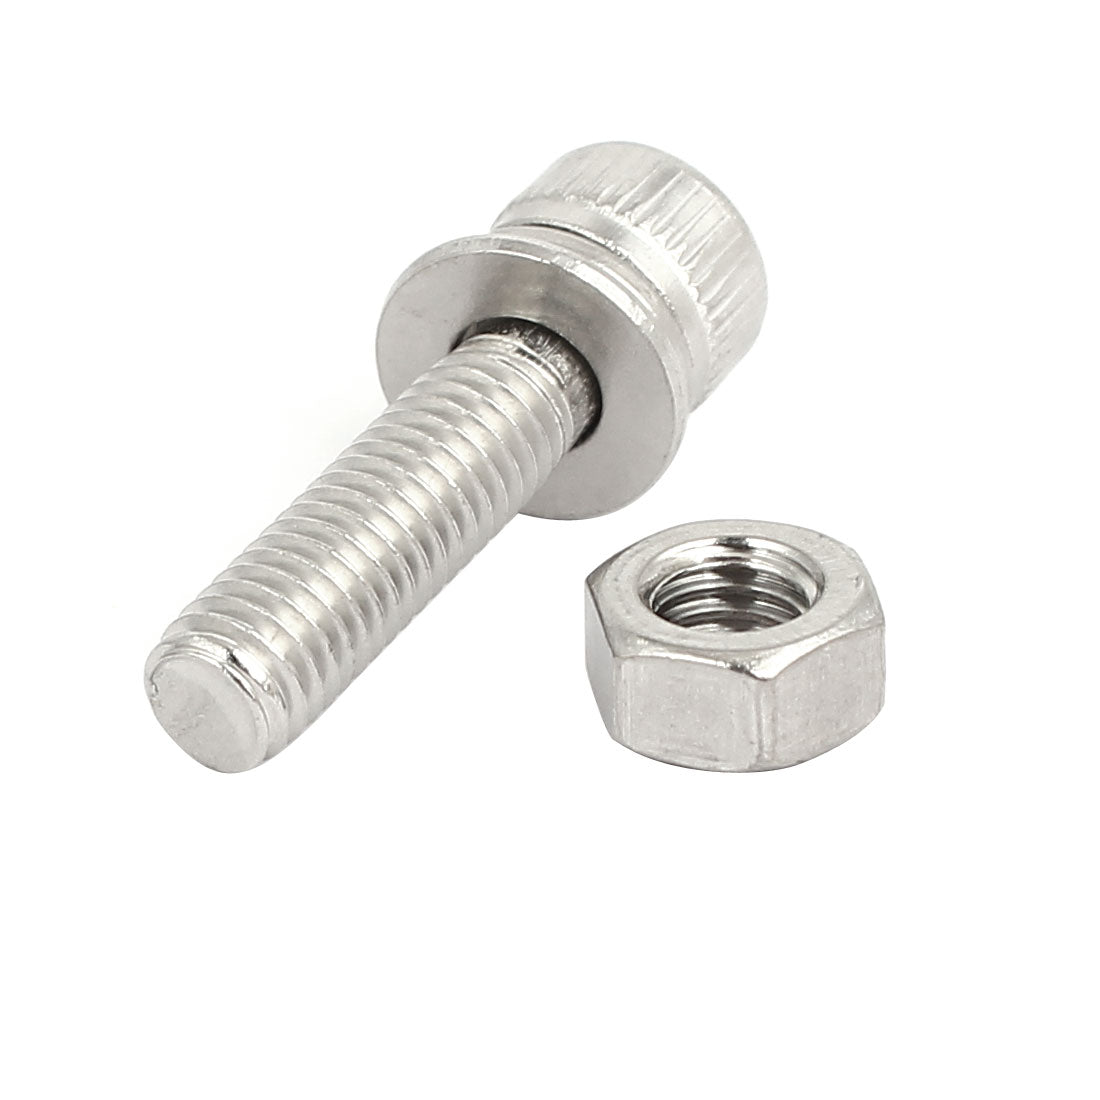 uxcell Uxcell M5x20mm 304 Stainless Steel Hex Socket Head Cap Bolt Screw Nut w Washer 12 Sets